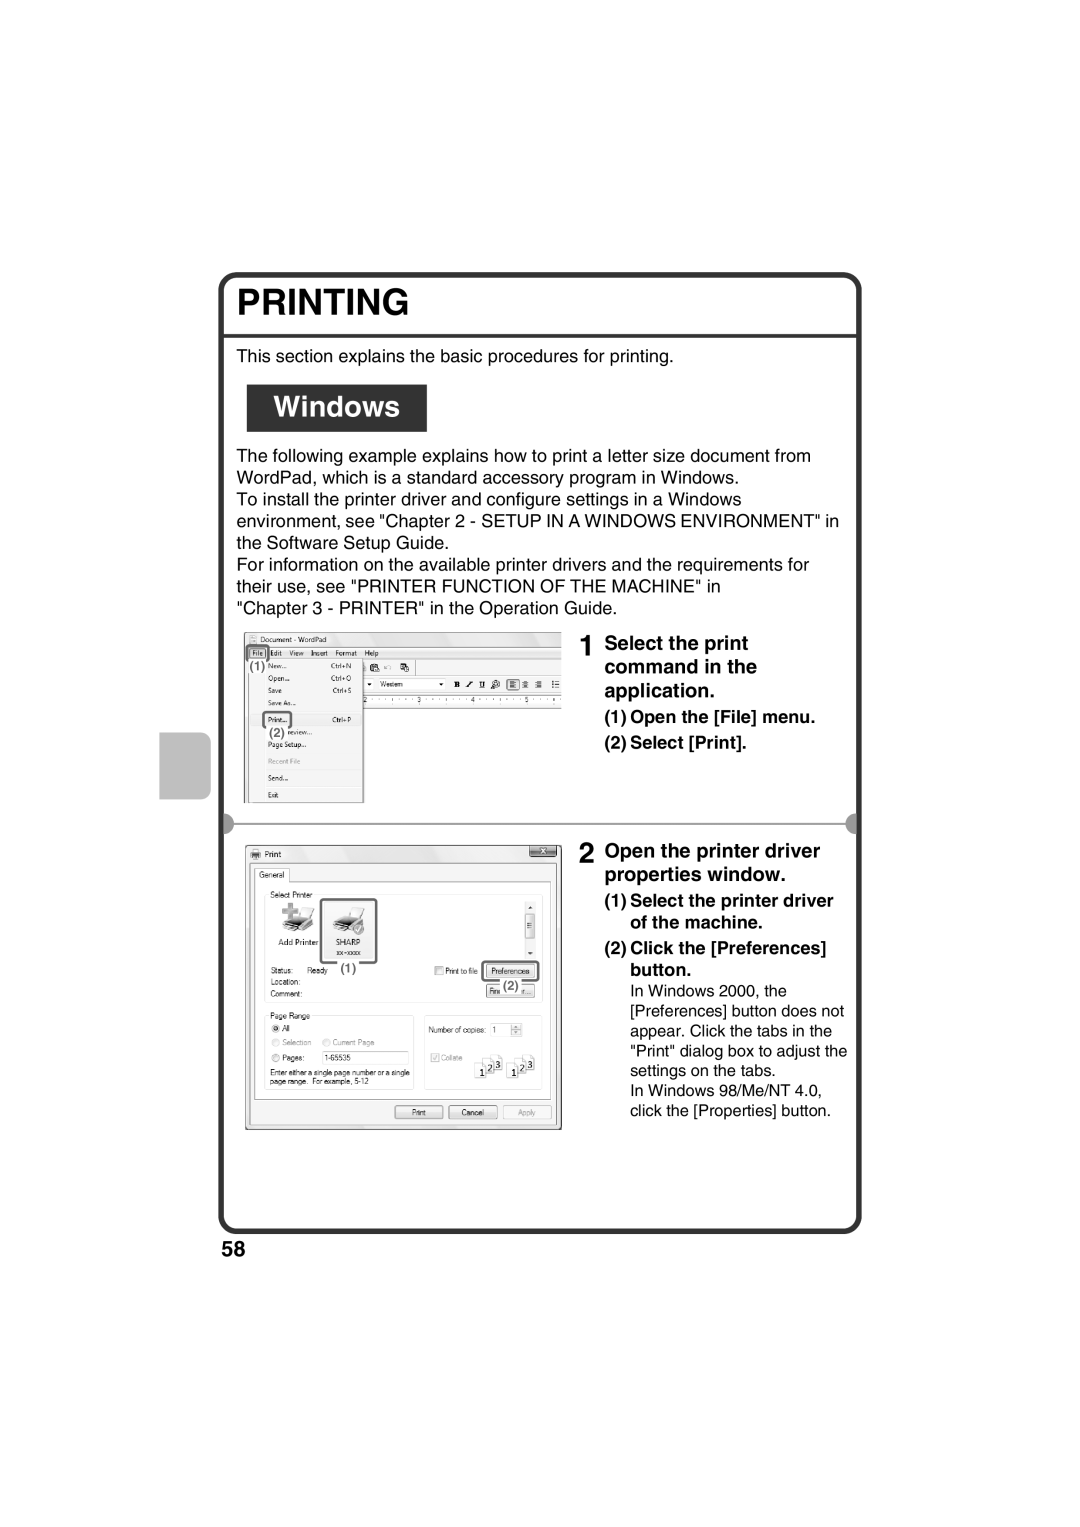 Sharp MX-B401 Printing, Windows, Select the print 1command in the application, Open the printer driver properties window 